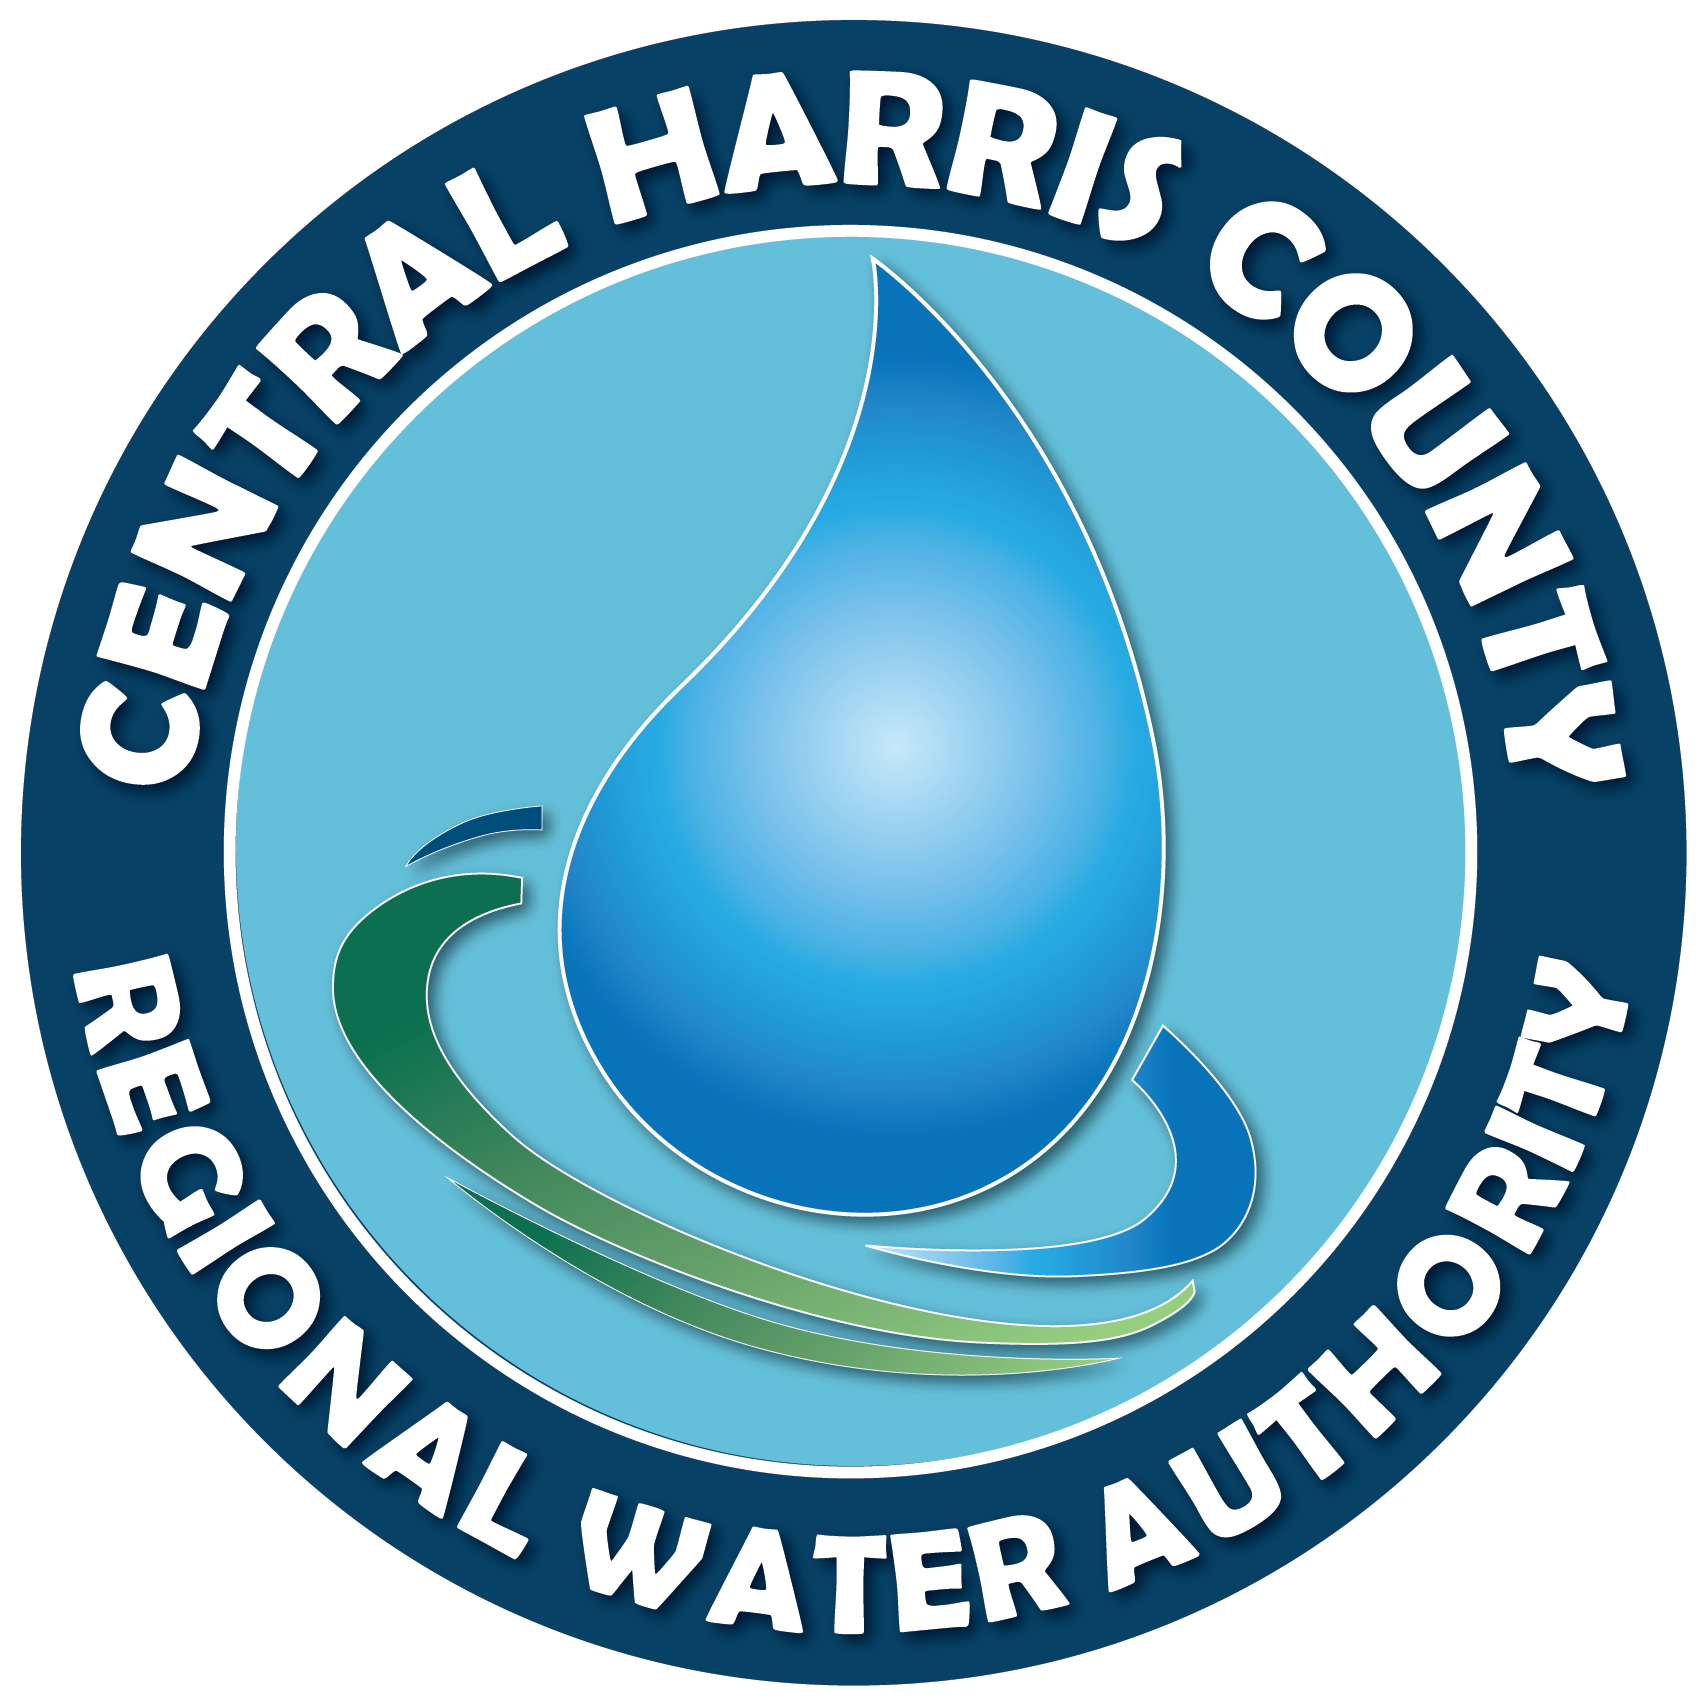 Central Harris County Regional Water Authority